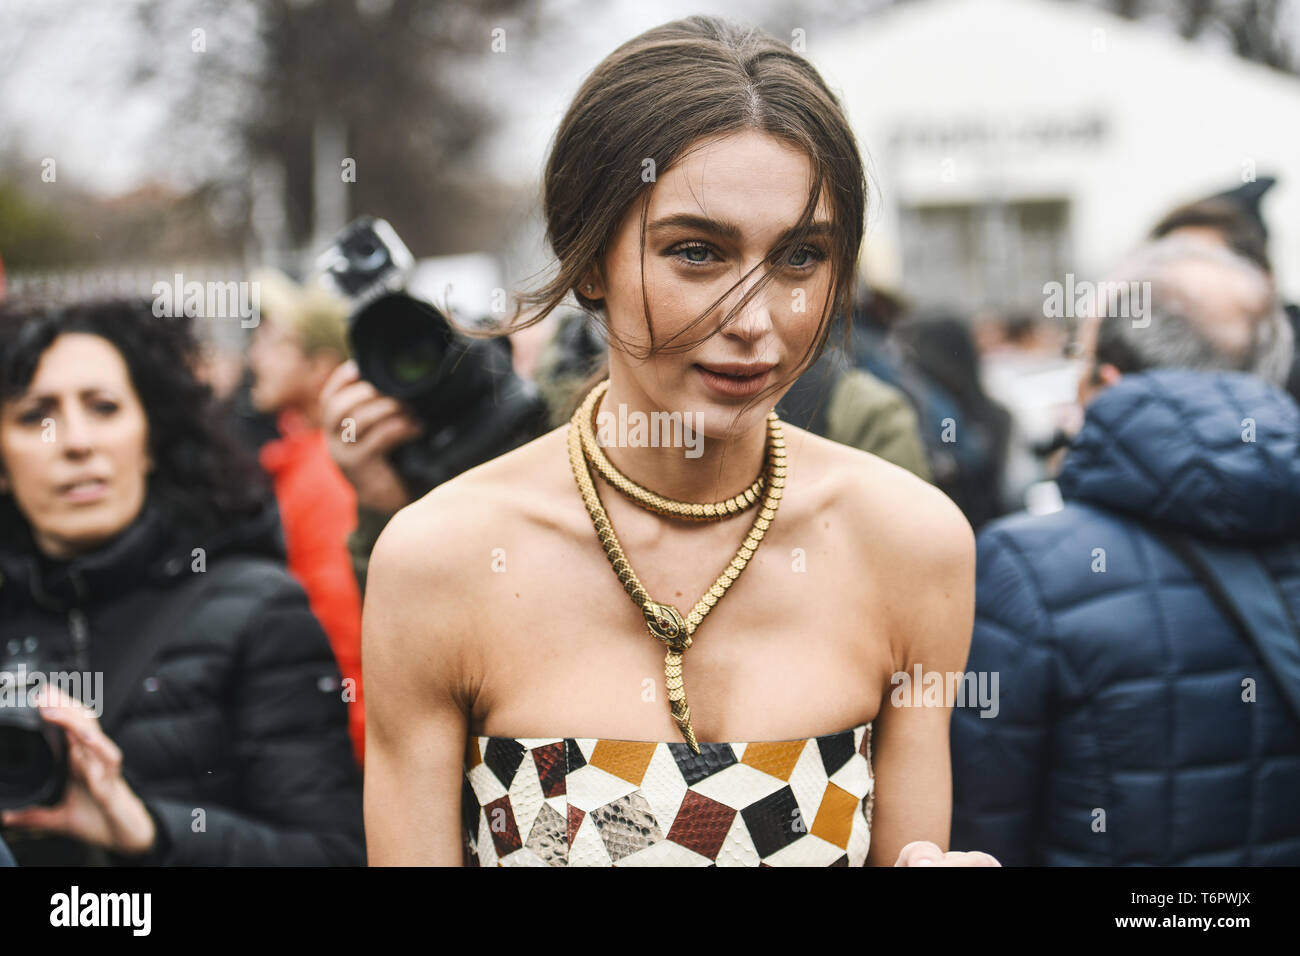 Paris, France -February 27, 2019: Street style outfit - Camila Coelho  before a fashion show during Paris Fashion Week - PFWFW19 Stock Photo -  Alamy